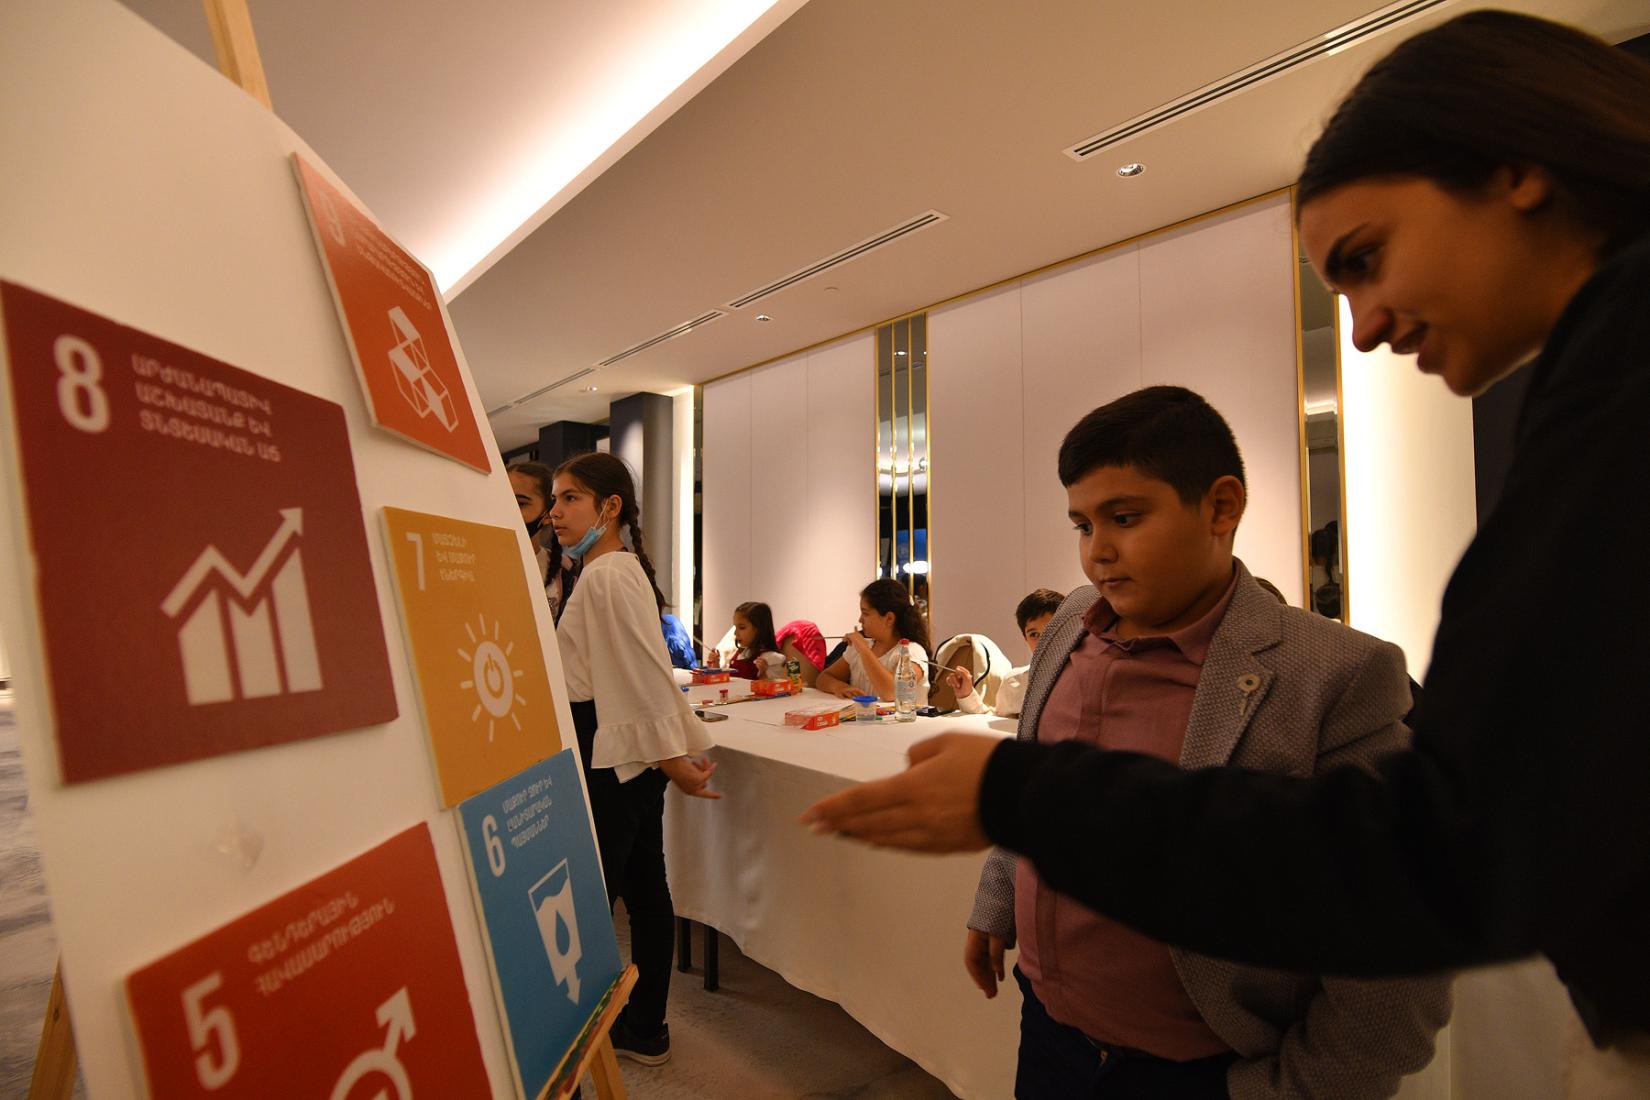 Youth coalition member explains the SDGs to a boy.